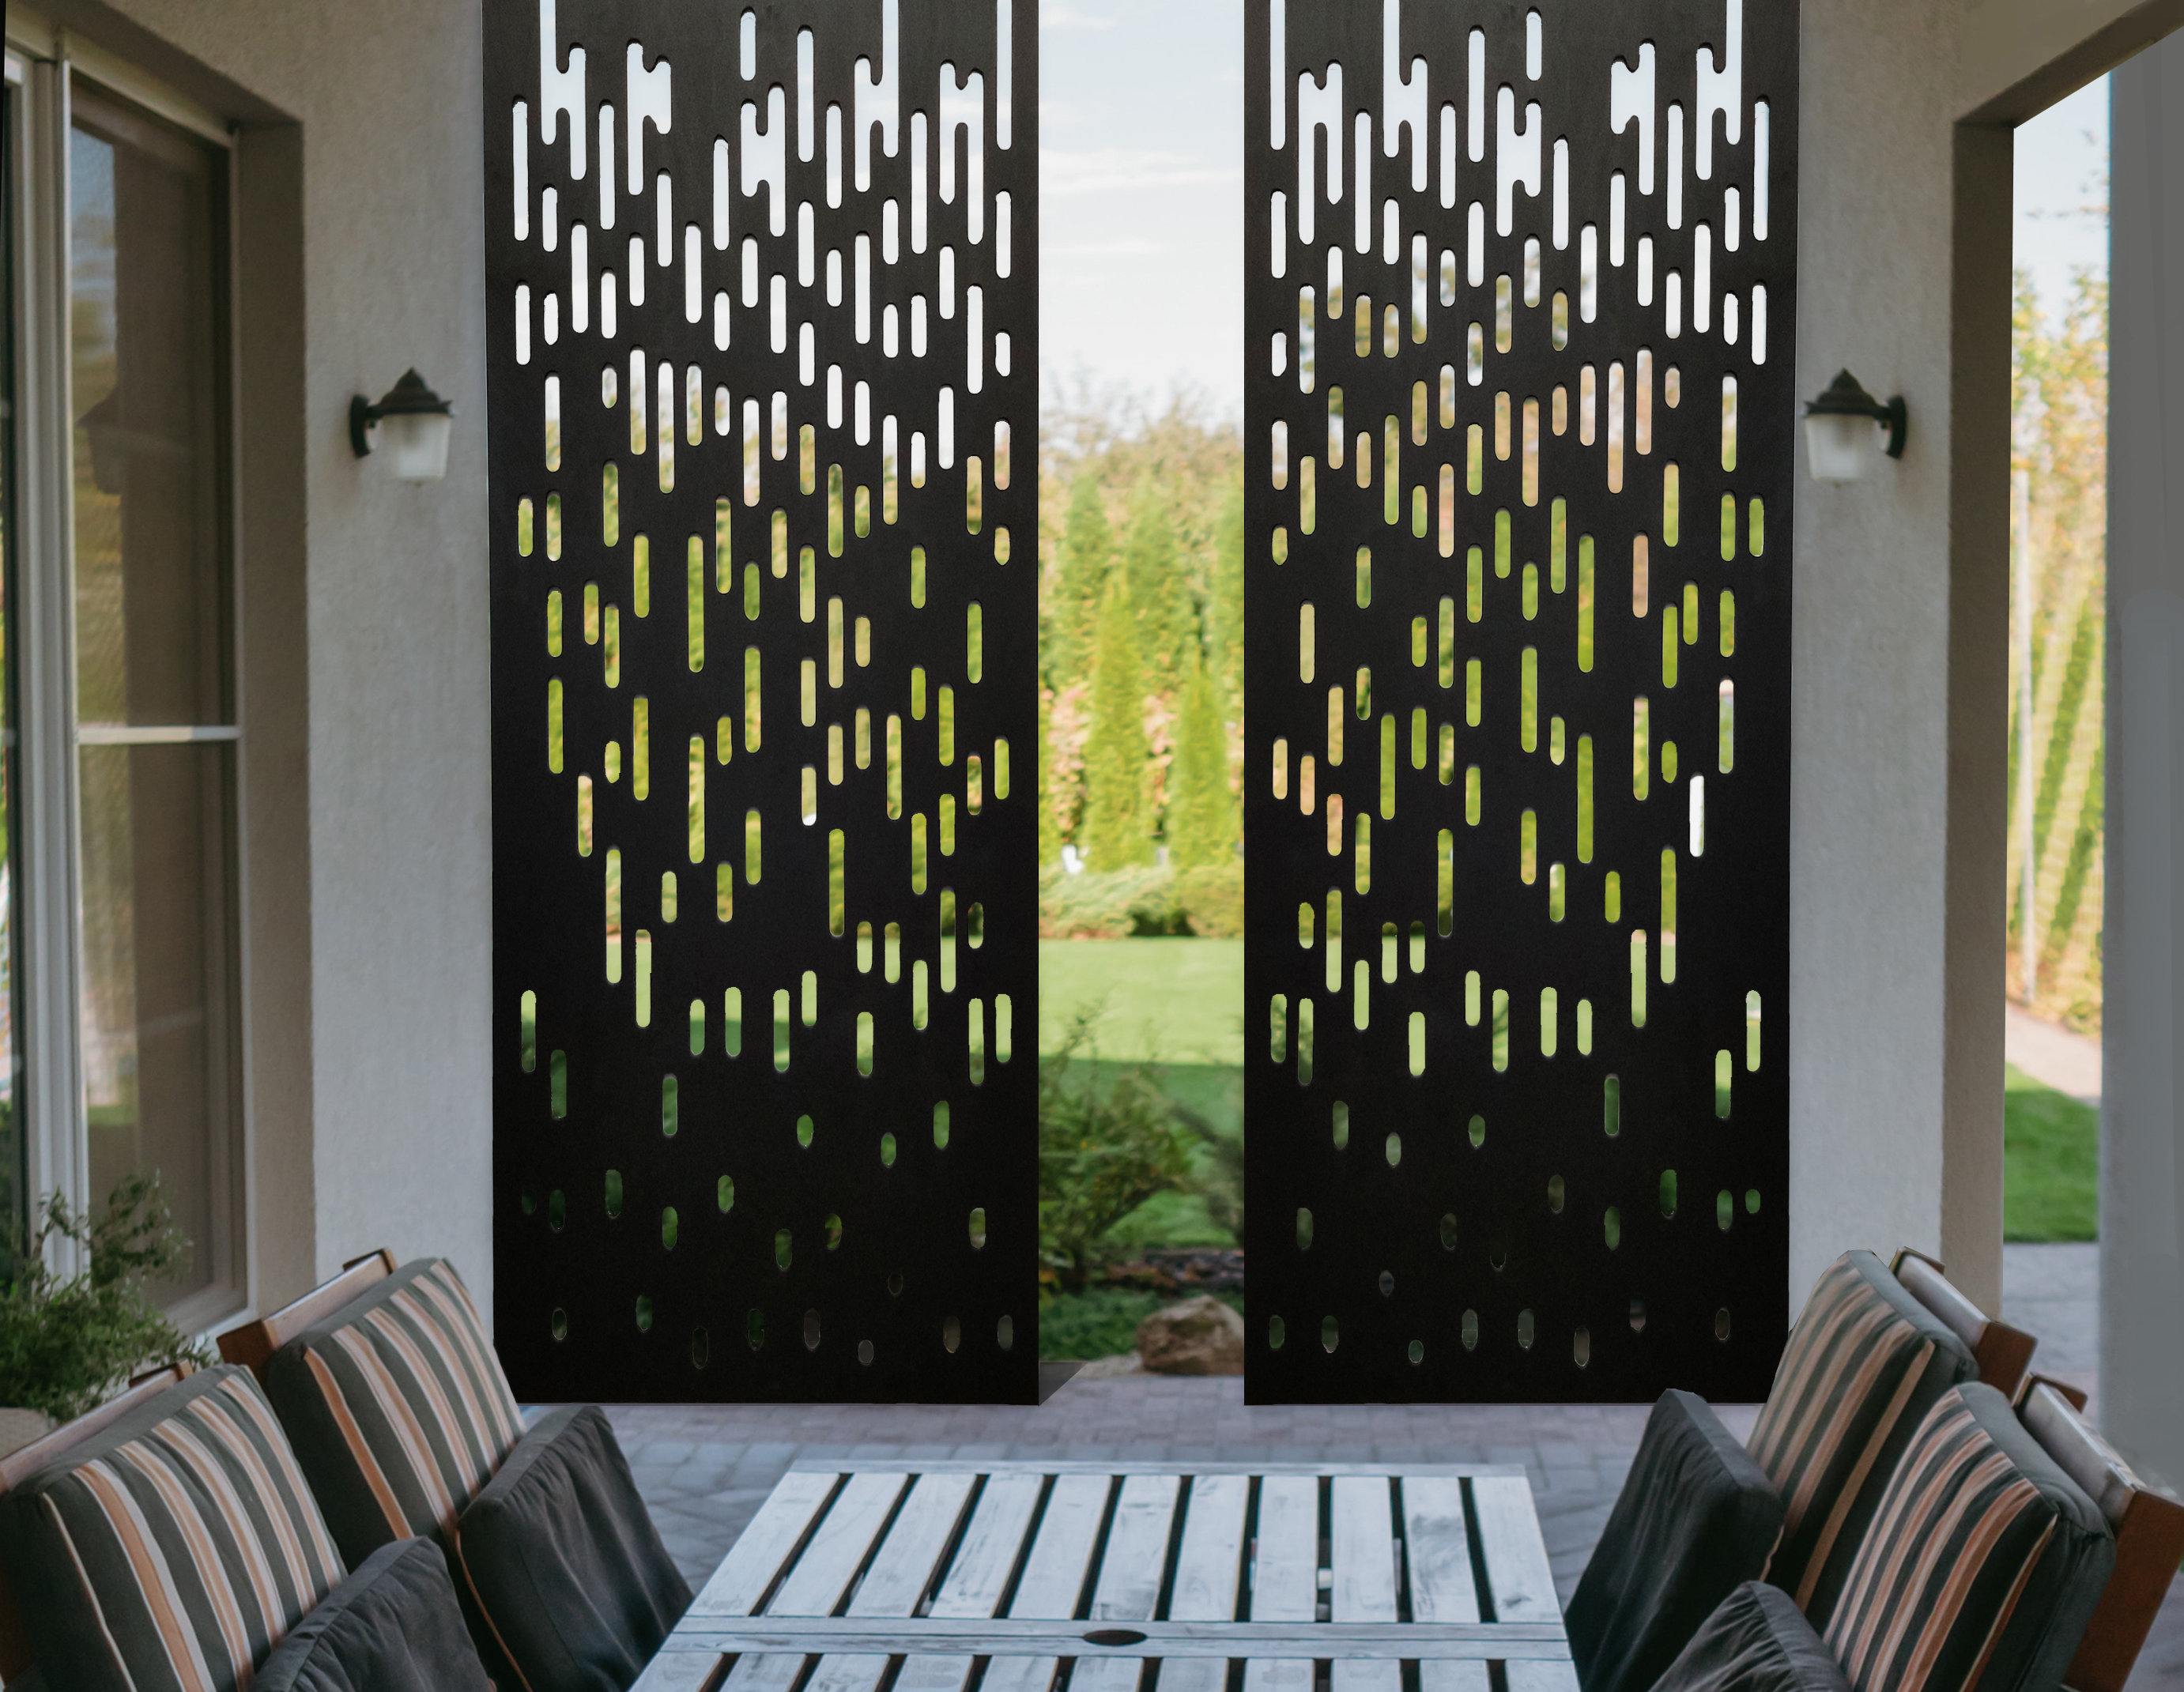 Modern Louvered Wall Divider Sun Shade Privacy Screen Panel for